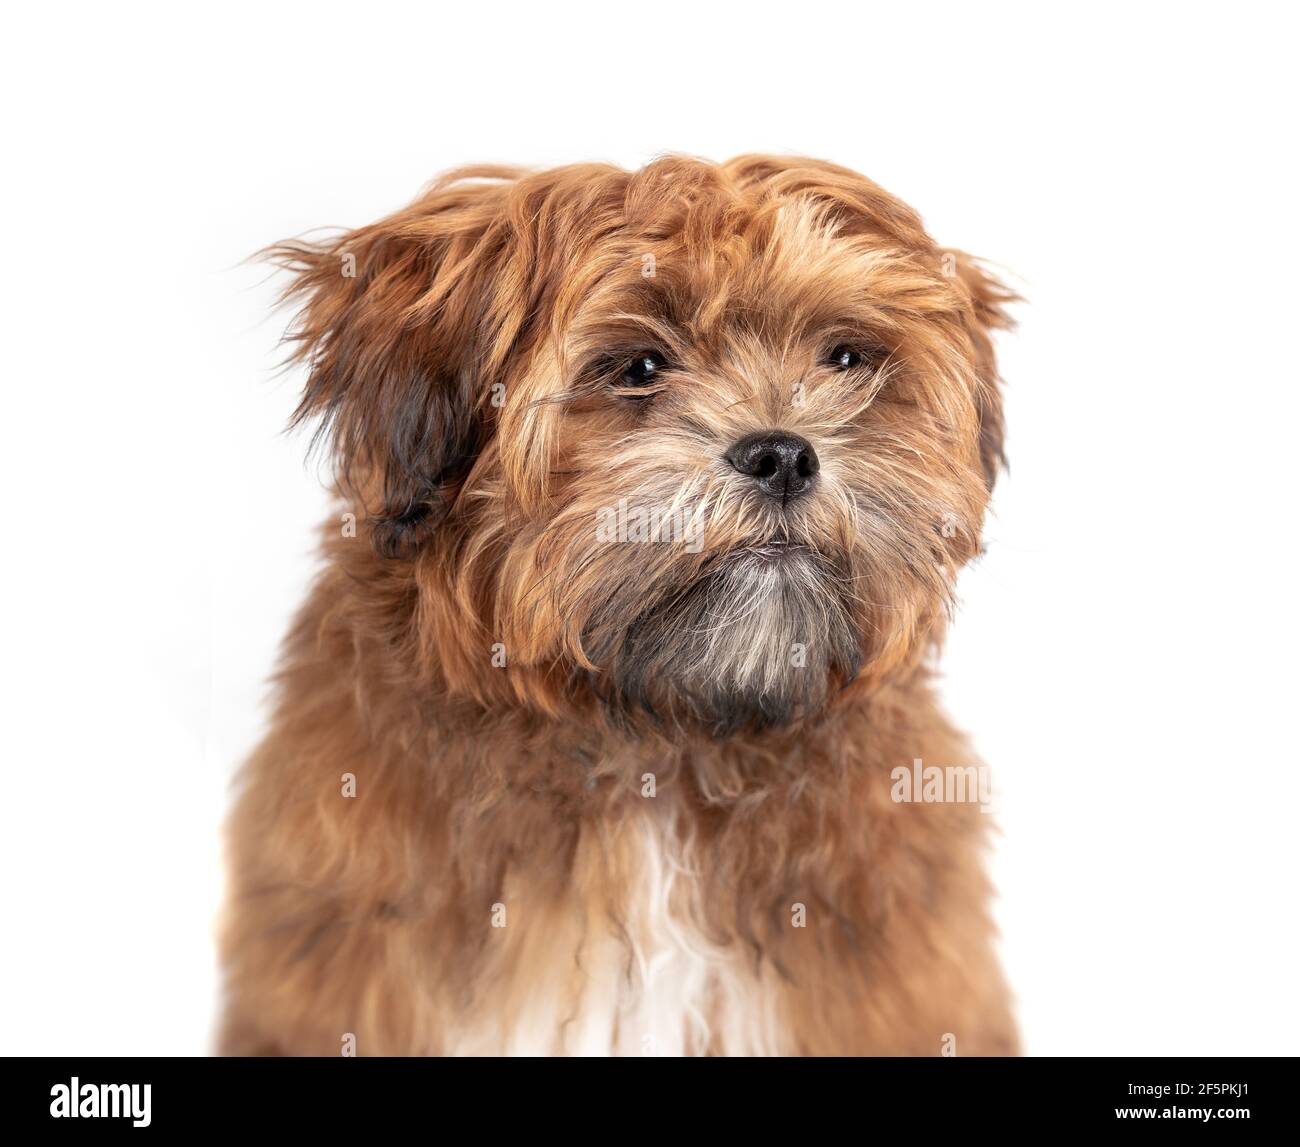 Isolated Shichon teddy bear puppy headshot. 6 month old small fluffy male dog. Light-apricot color and black nose. Zuchon, Shih Tzu-Bichon mix. Stock Photo